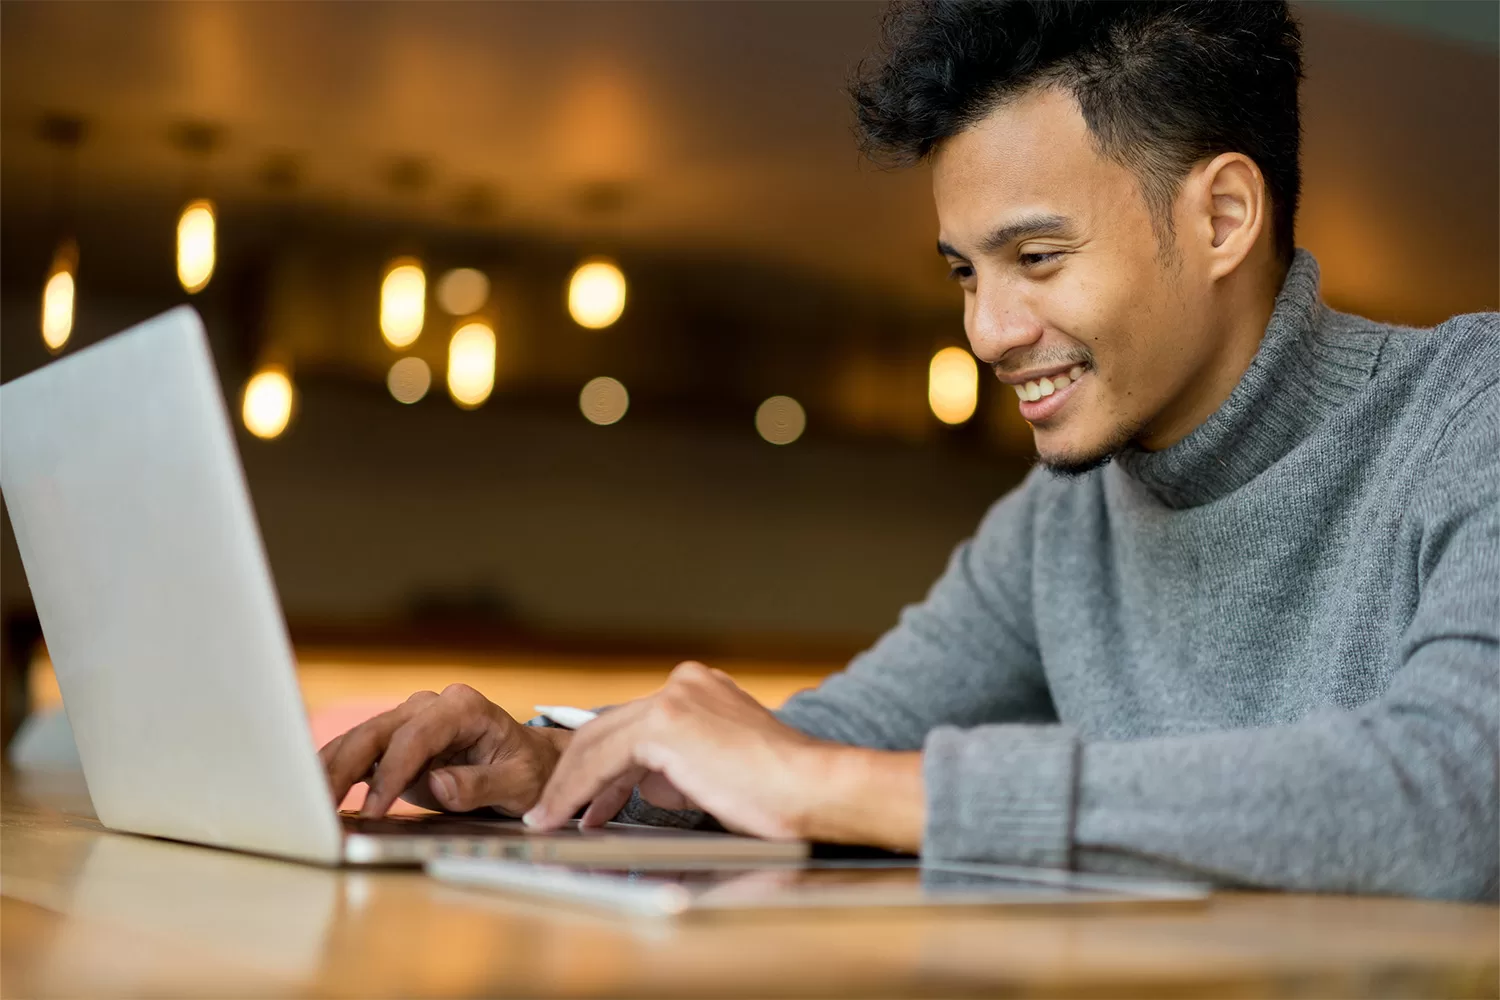 Student sitting in front of a laptop and smiling.